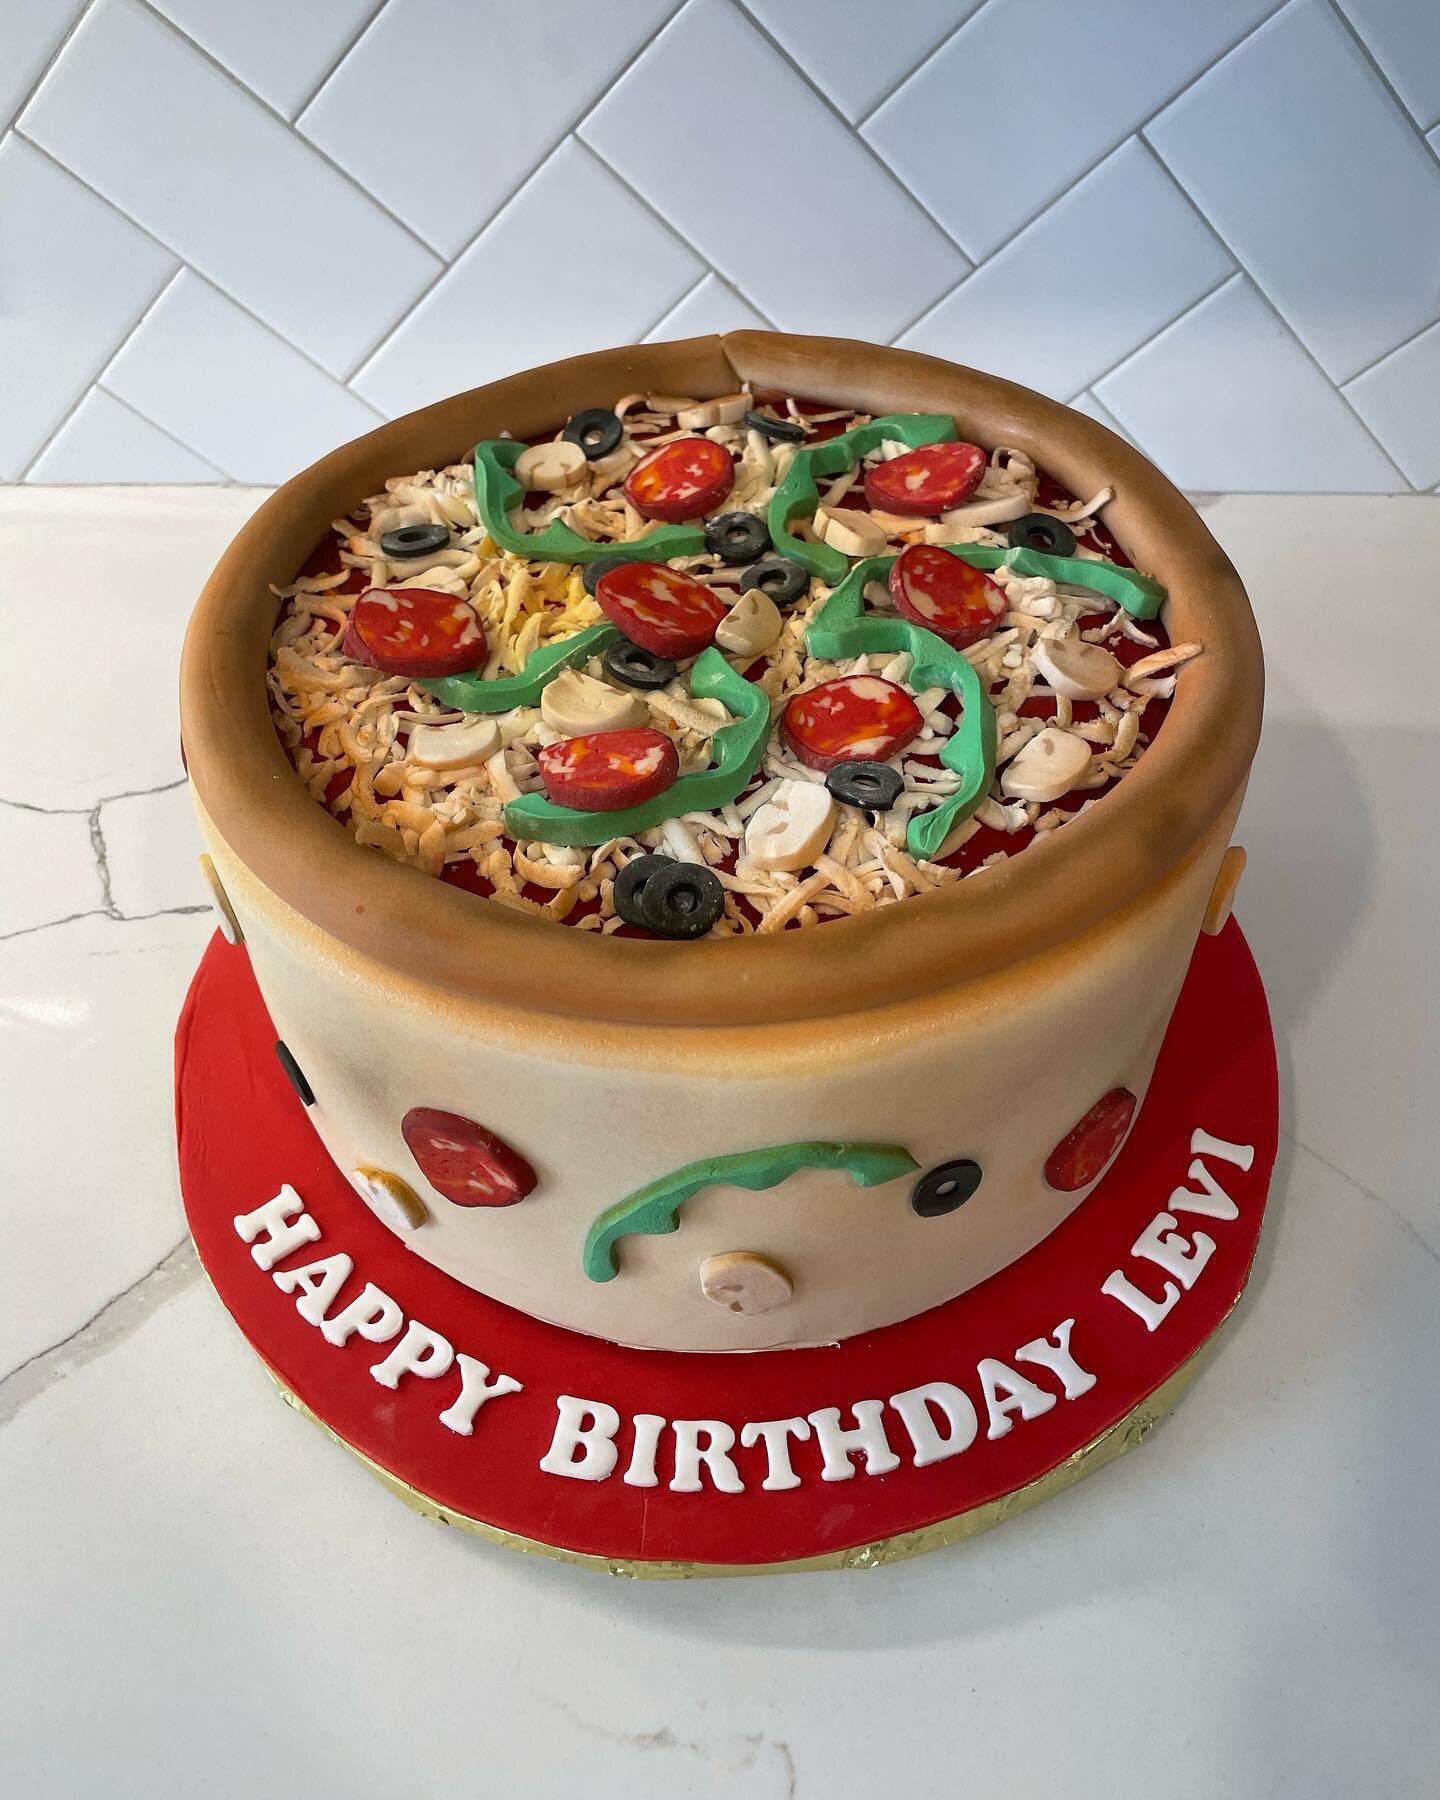 Slice of pizza or cake? Had some fun making this life size pizza inspired birthday cake with all the toppings you could want! Vanilla raspberry mousse 🎂🍕
.
.
.
. #bostonpastrychef #pizzacake #cakesofinstagram #cakesofboston #smallbussiness #pastryc